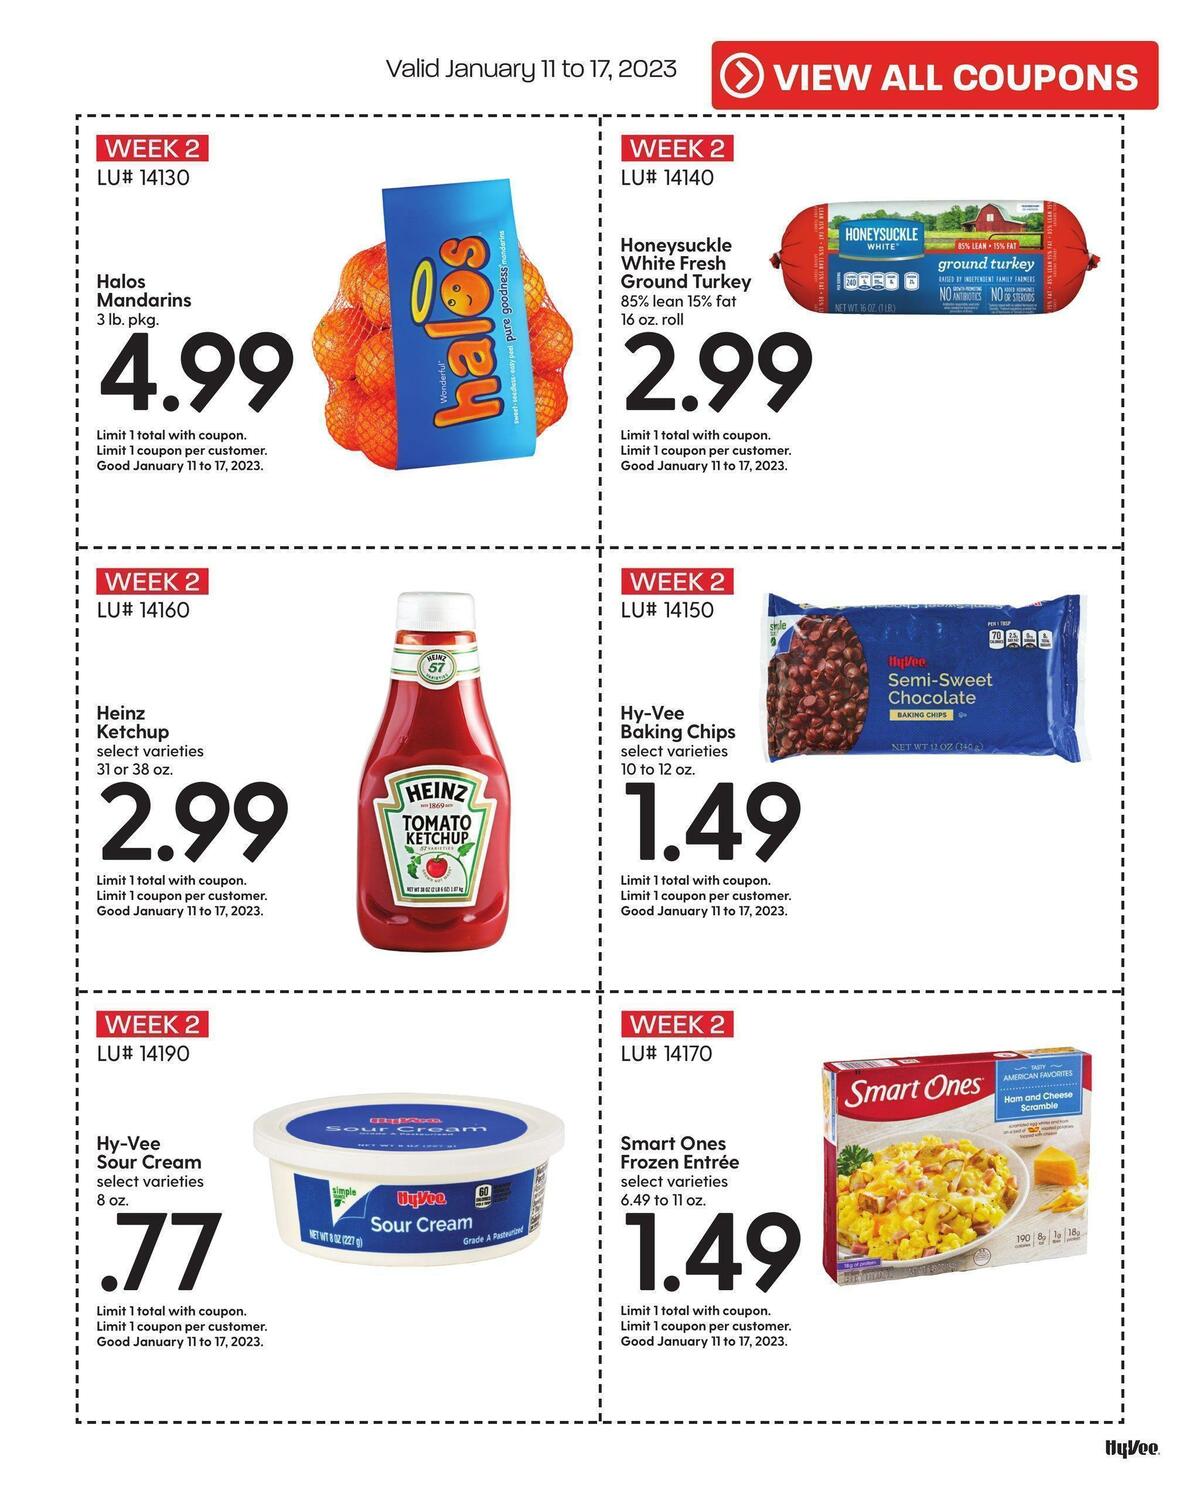 Hy-Vee January Mega Coupon Book Weekly Ad from January 1